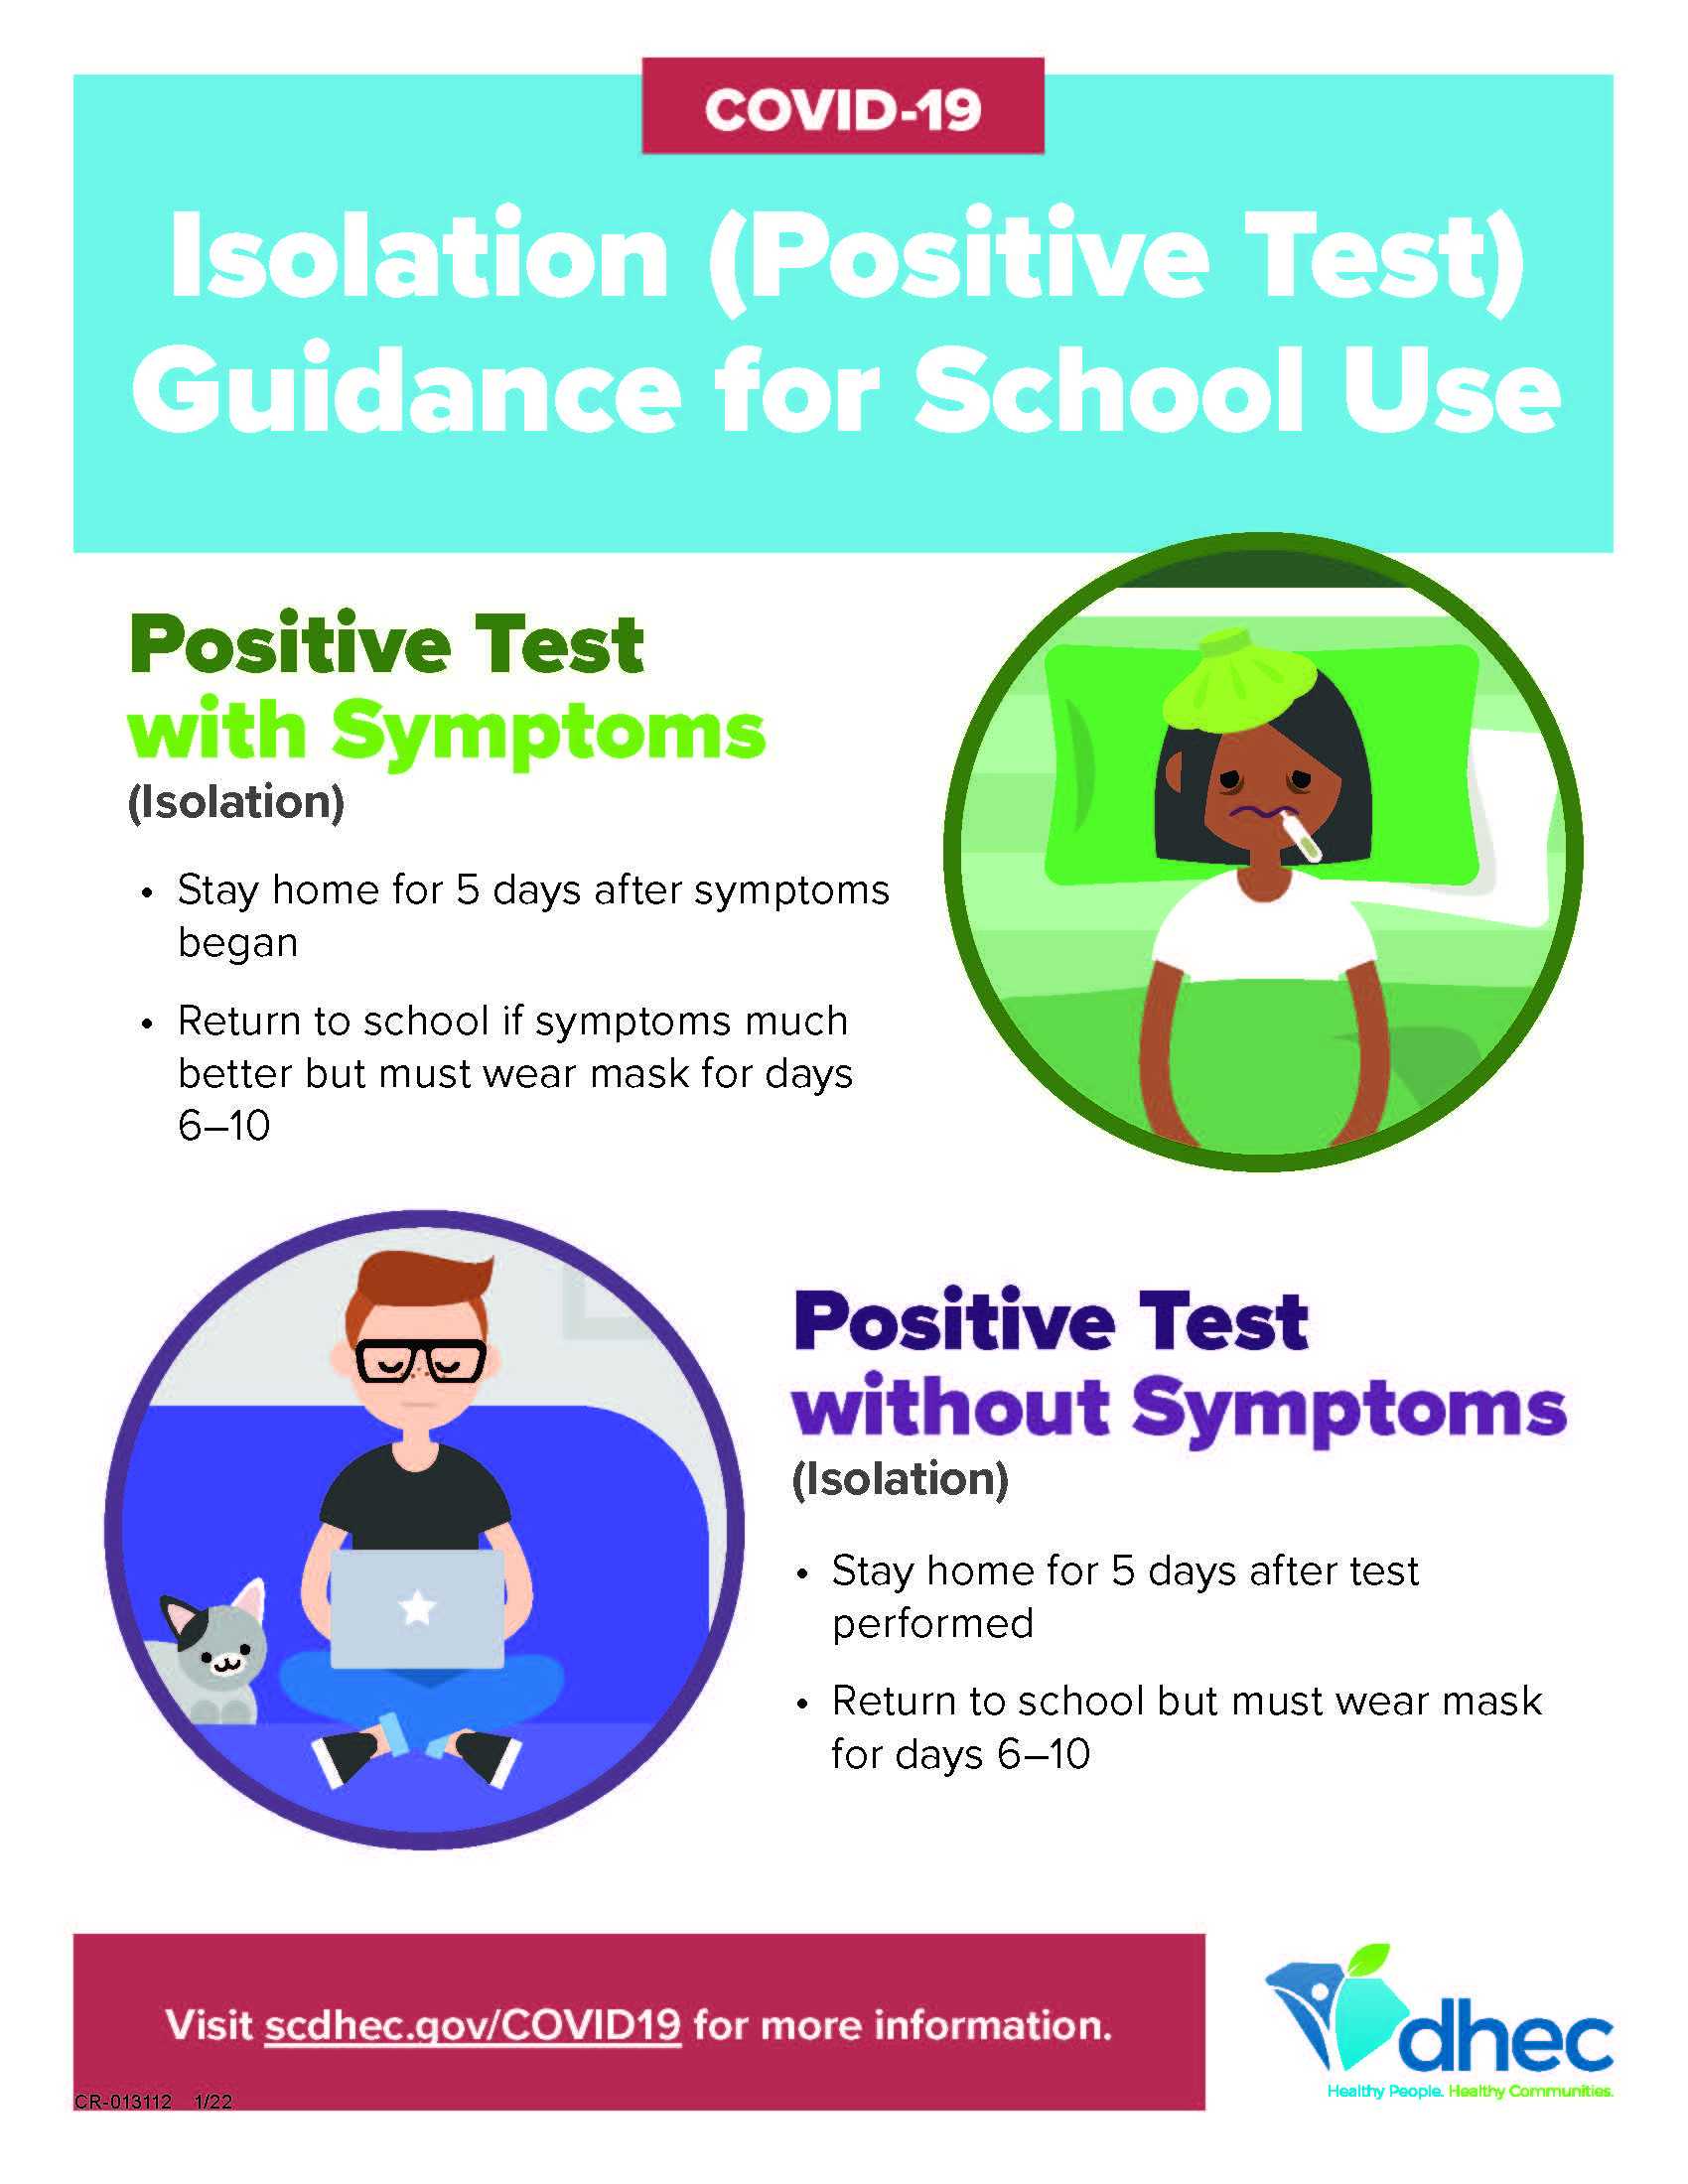 Visual aid for covid exposure guidelines that features vector illustrations of students home sick. Covid 19 Isolation (positive test) guidance for school use. Positive test with symptoms (isolation) Stay home for 5 days after symptoms began. Return to school if symptoms much better but must wear mask for days 6-10. Positive test without symptoms (isolation) Stay home for 5 days after test performed. Return to school but must wear mask for days 6-10. Visit scdhec.gov/covid19 for more information. Dhec health people, healthy communities logo.